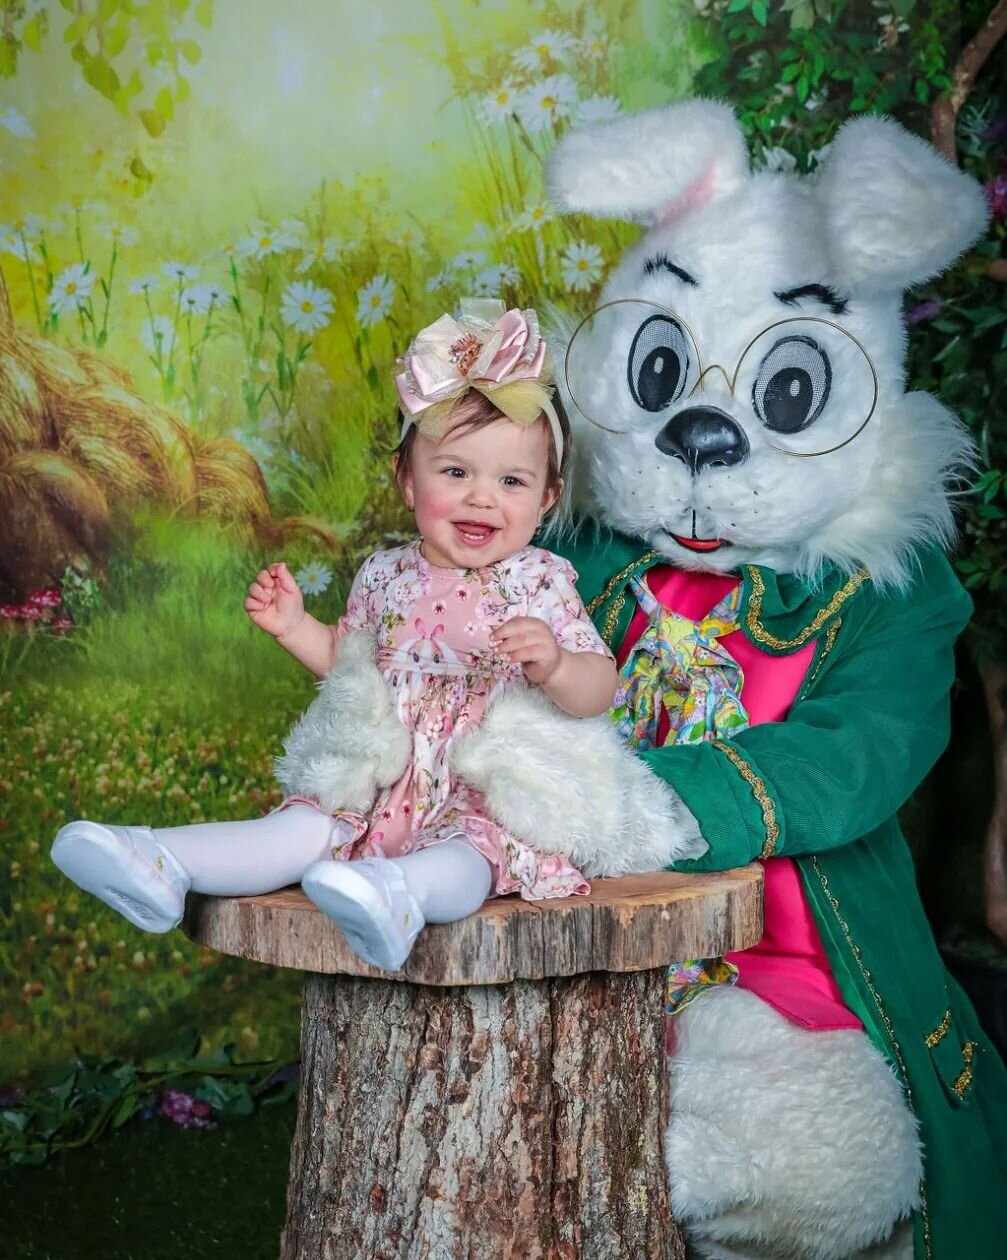 We have an EGGstra special day ahead!! It's the bunny's first day back in the studio and we have some wonderful families coming to visit - we can't wait to share all of our NEW spring scenes 🌈🐣🐰🌼 #magicalexperience #magicalencounters #njsanta #nj